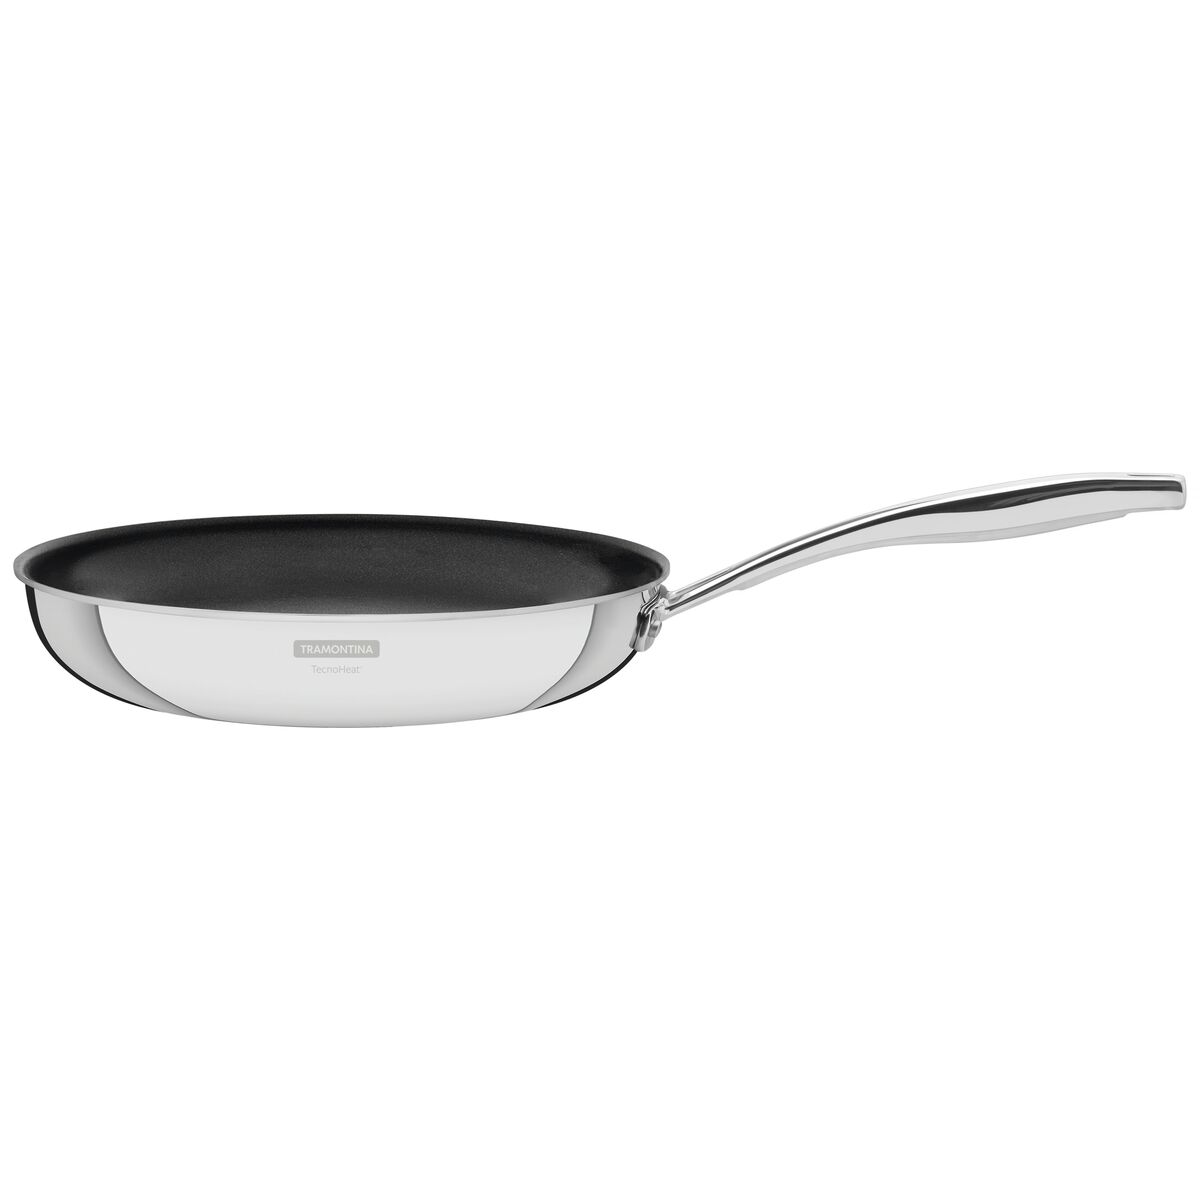 Tramontina Grano 30 cm 3,4 L shallow stainless steel frying pan with long handle, tri-ply body and interior non-stick coating